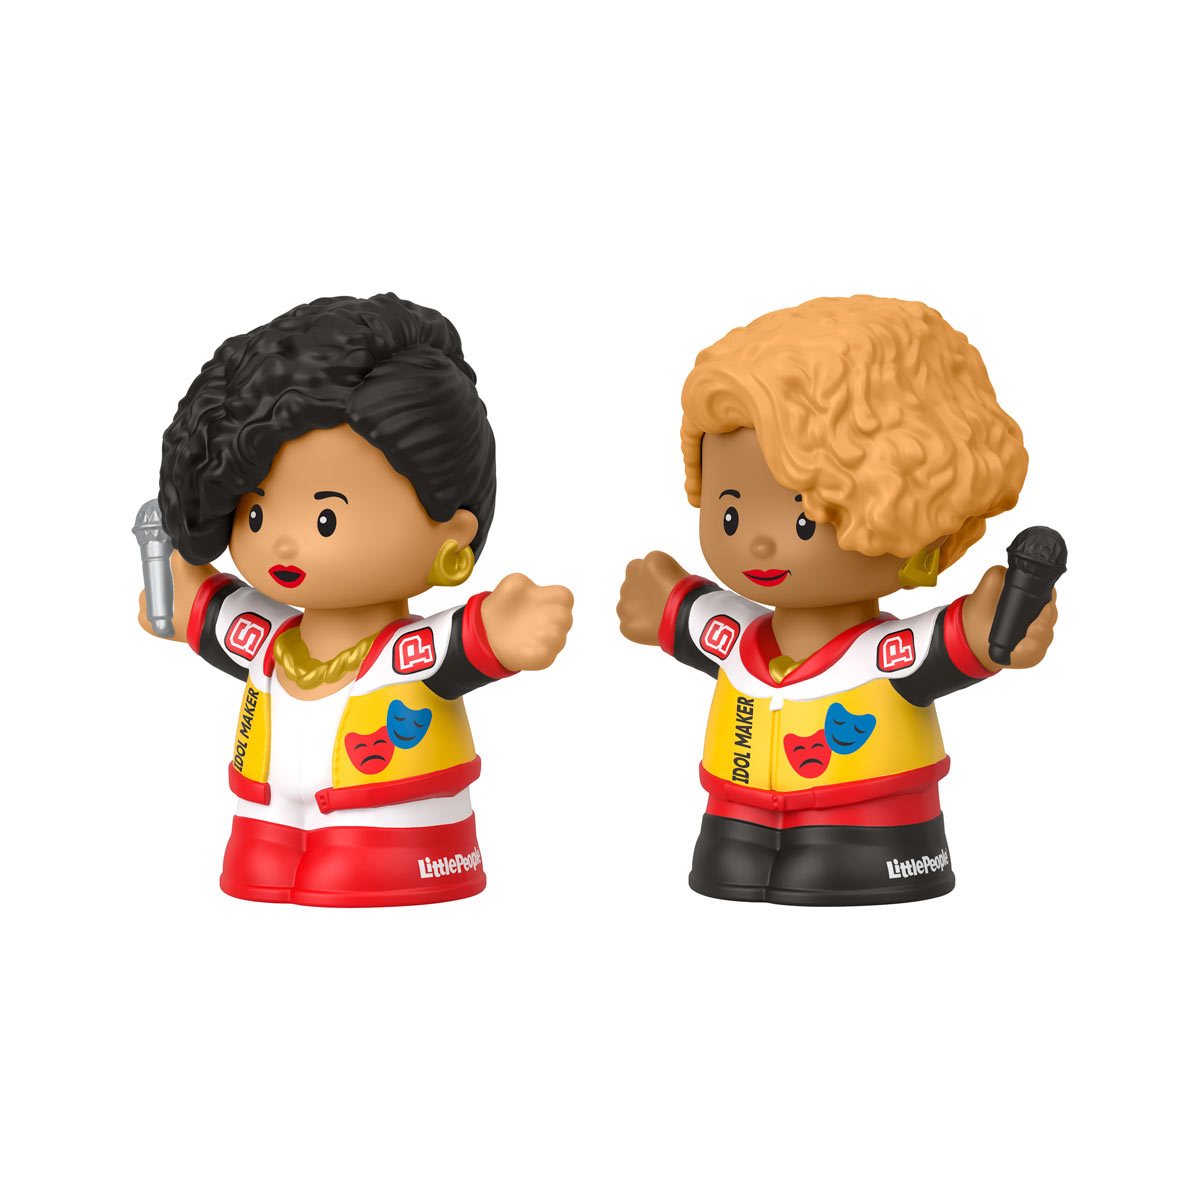  Little People Collector Salt-N-Pepa Special Edition